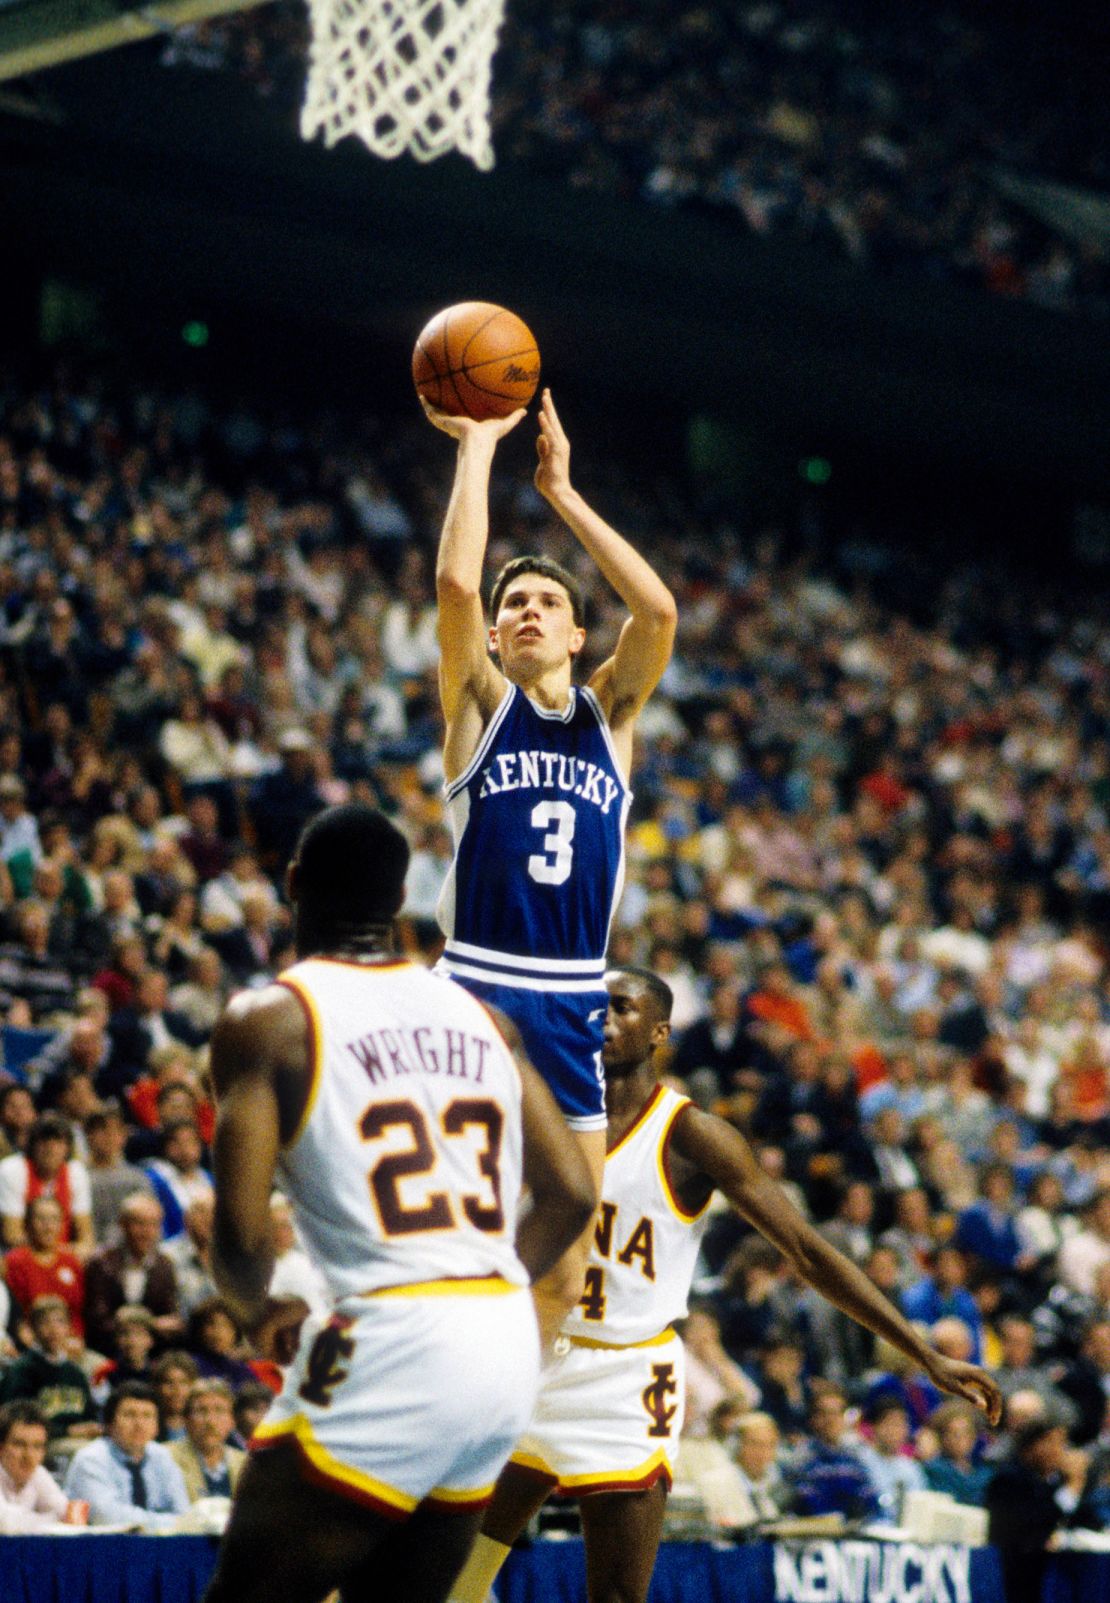 Kentucky Wildcats guard Rex Chapman (3) in action against the Iona Gaels at Rupp Arena in December 1986.